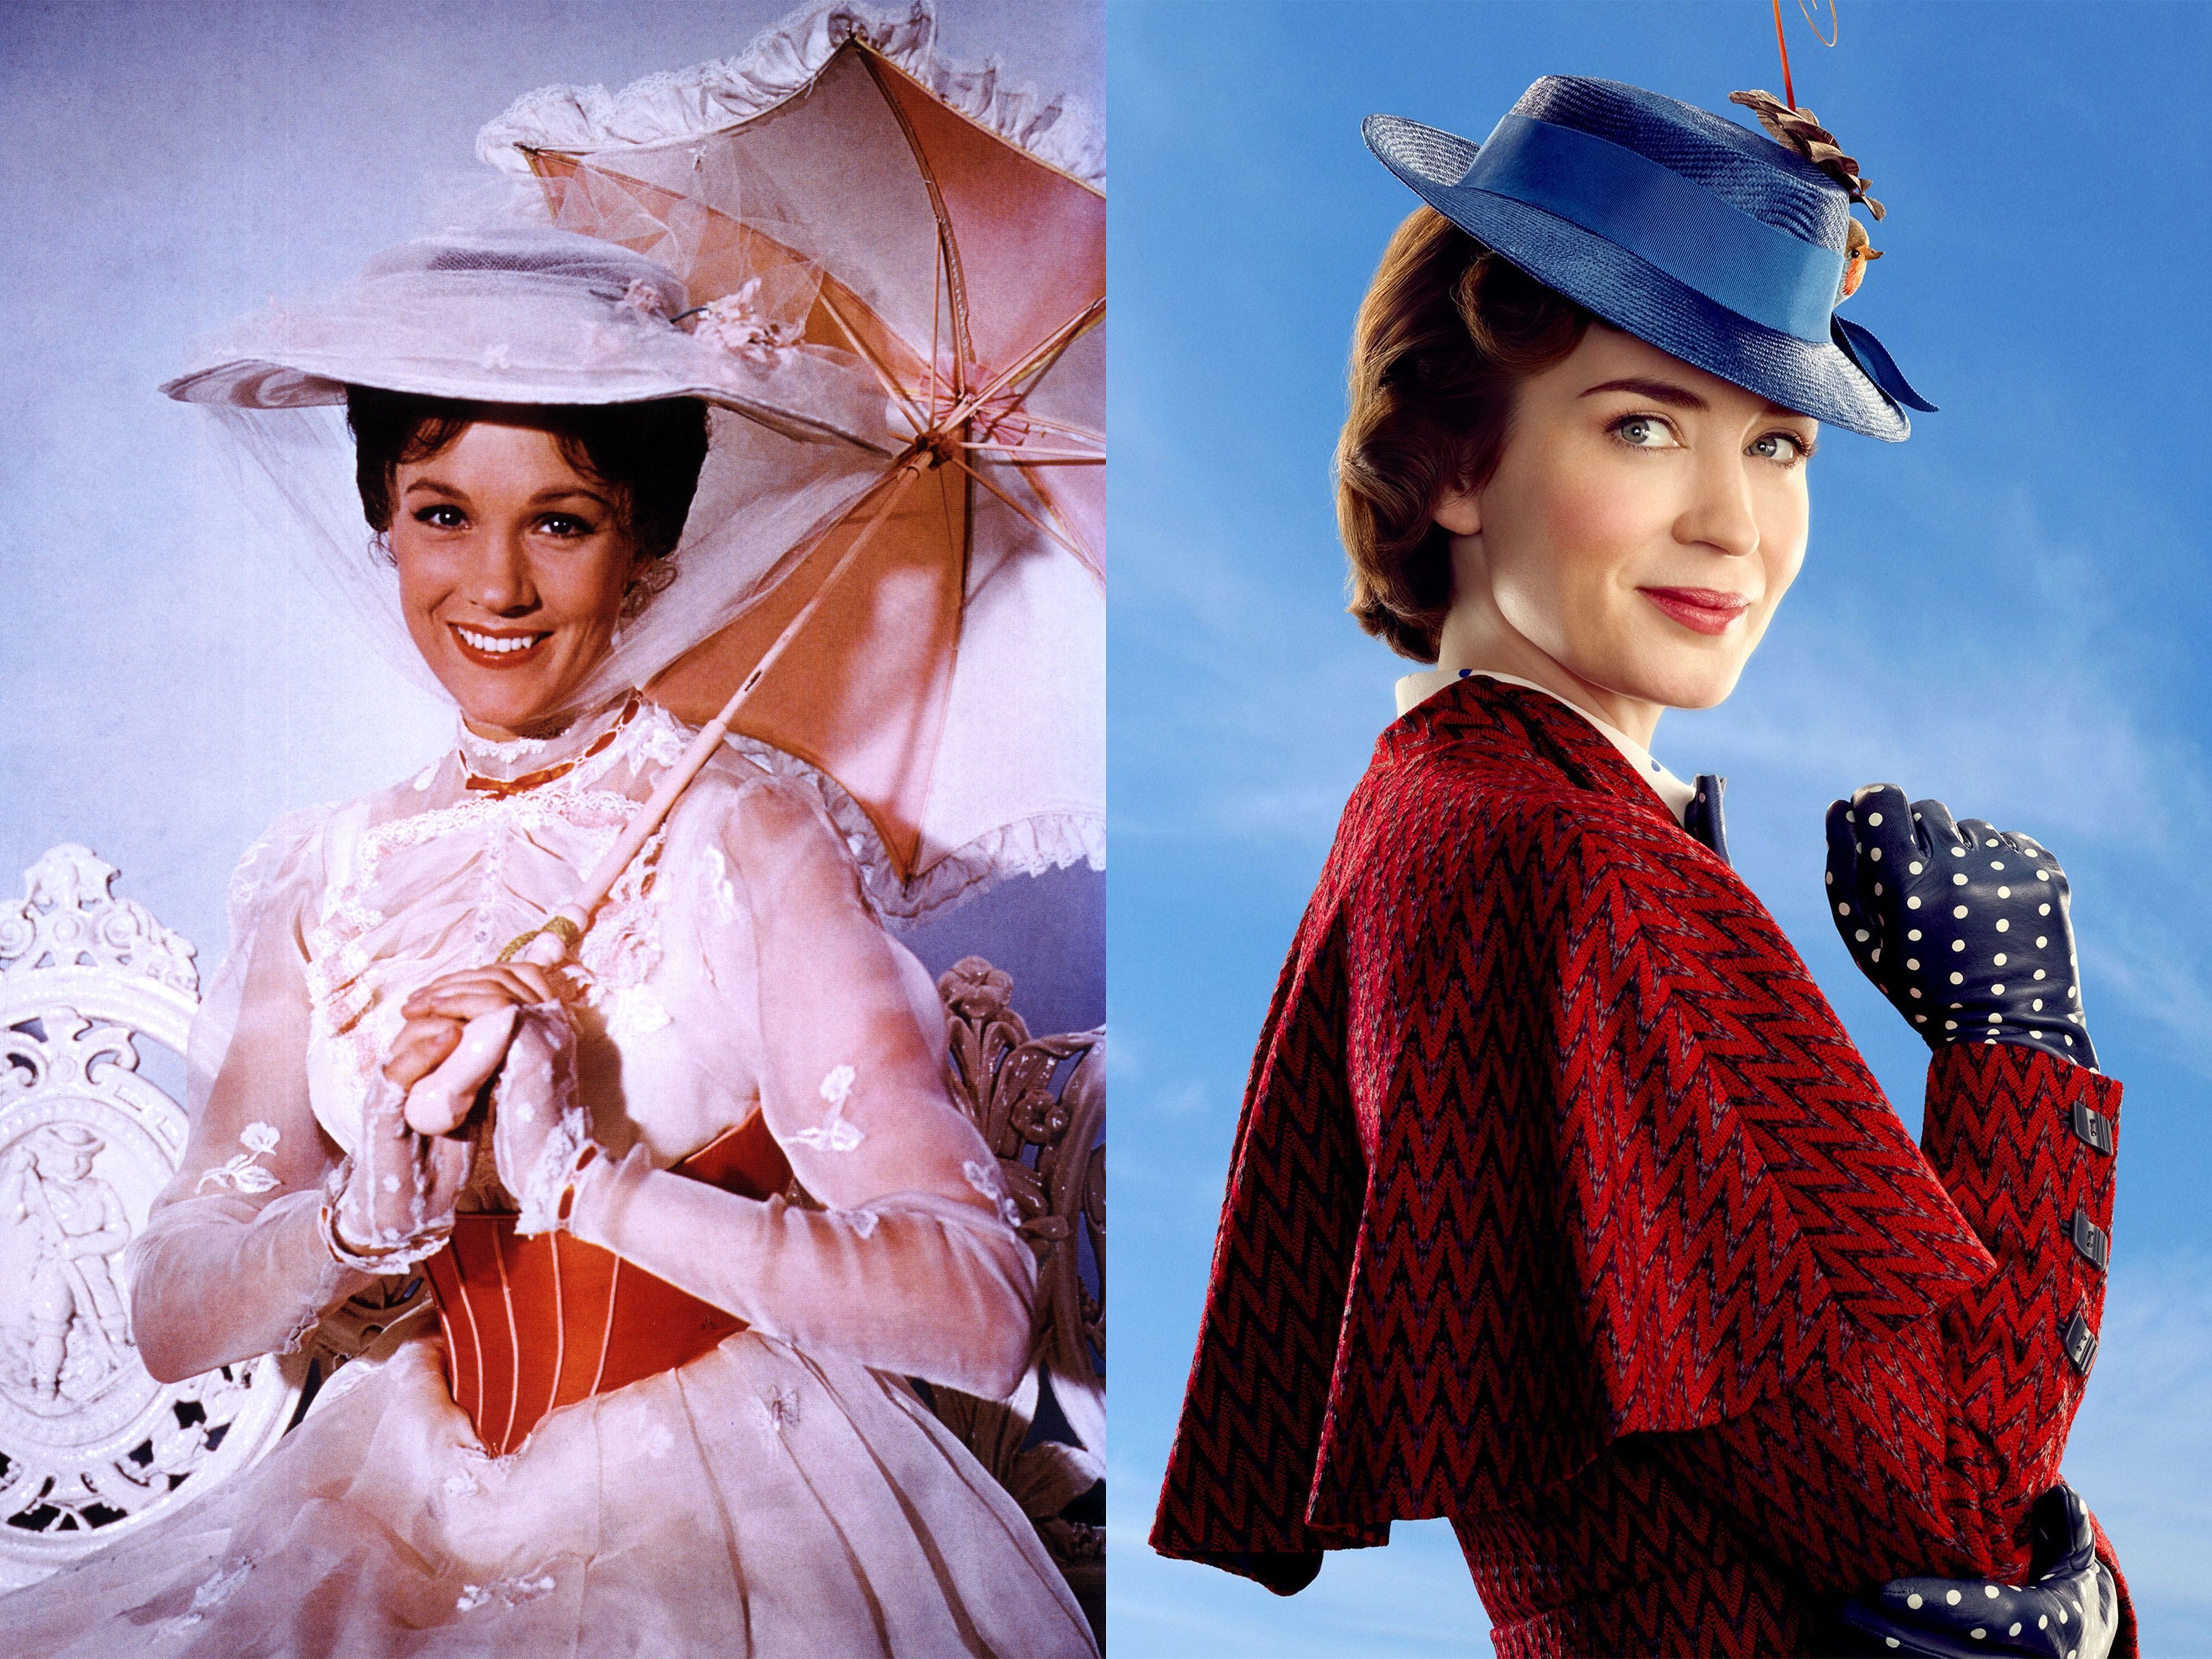 Julie Andrews is &quot;over the moon&quot; with the Mary Poppins sequel